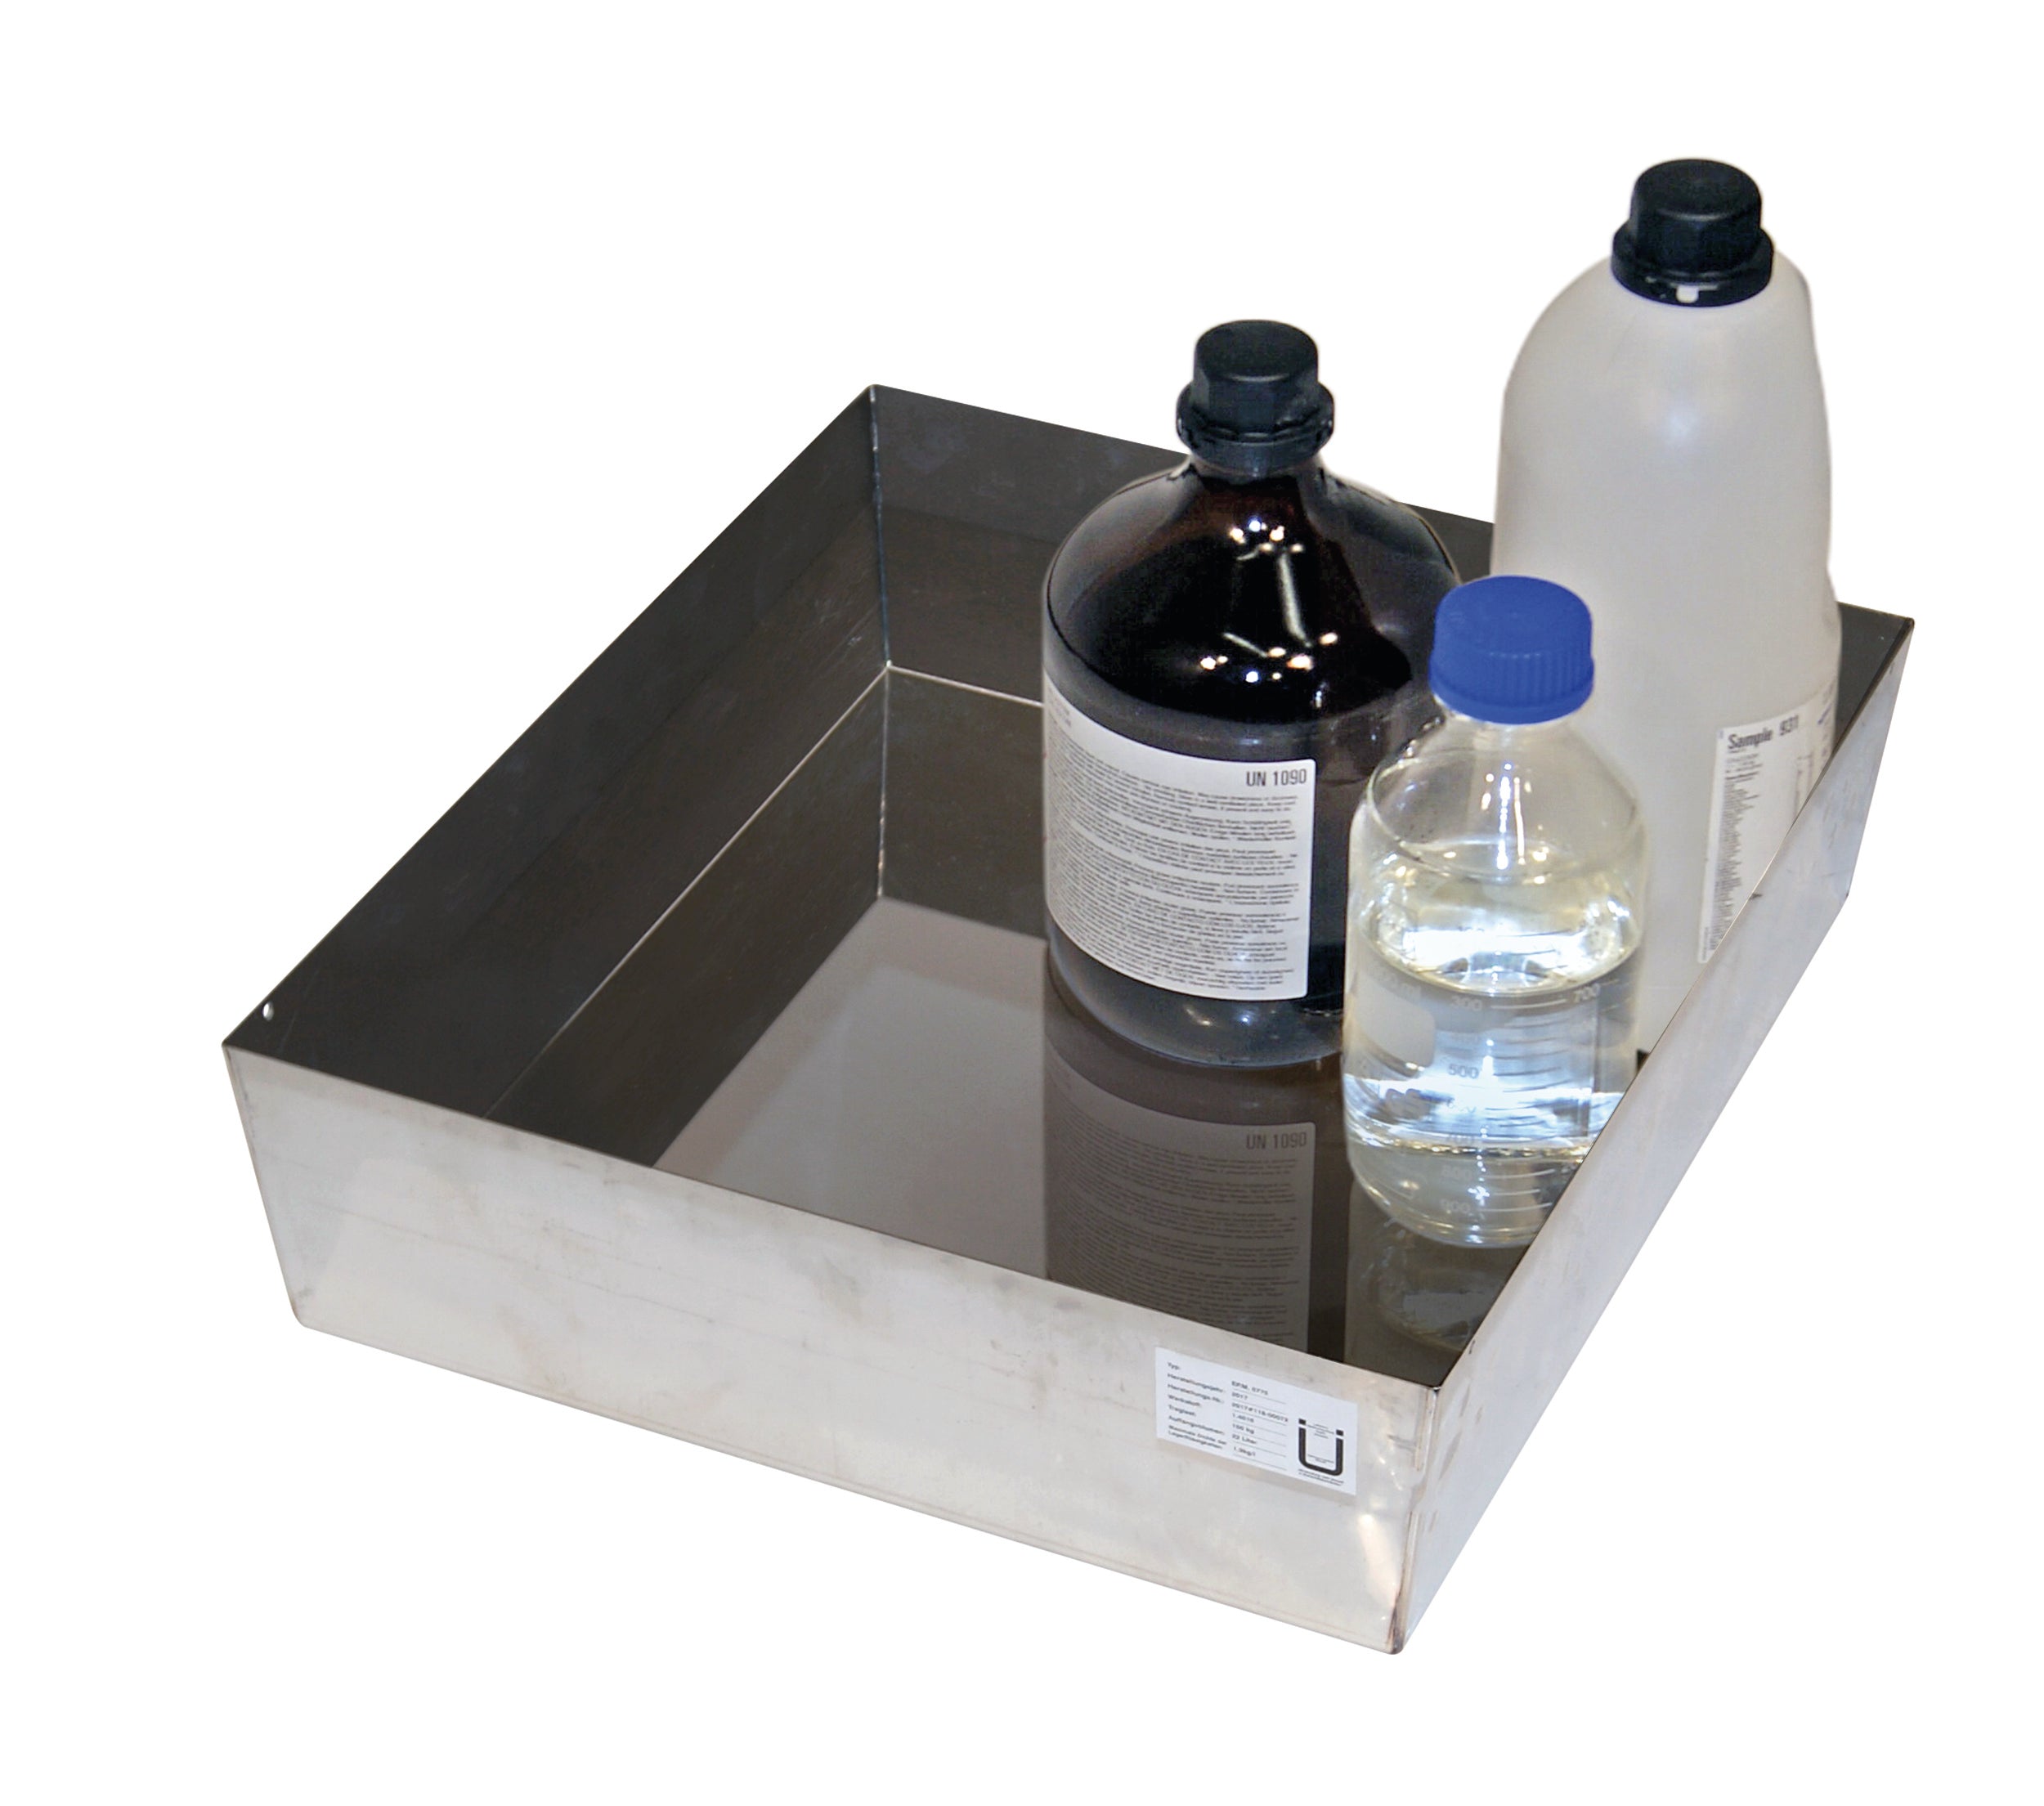 Tray shelf (standard) (volume: 22.00 litres) for model(s): Q90, S90, S60 with width 600 mm, stainless steel 1.431 raw